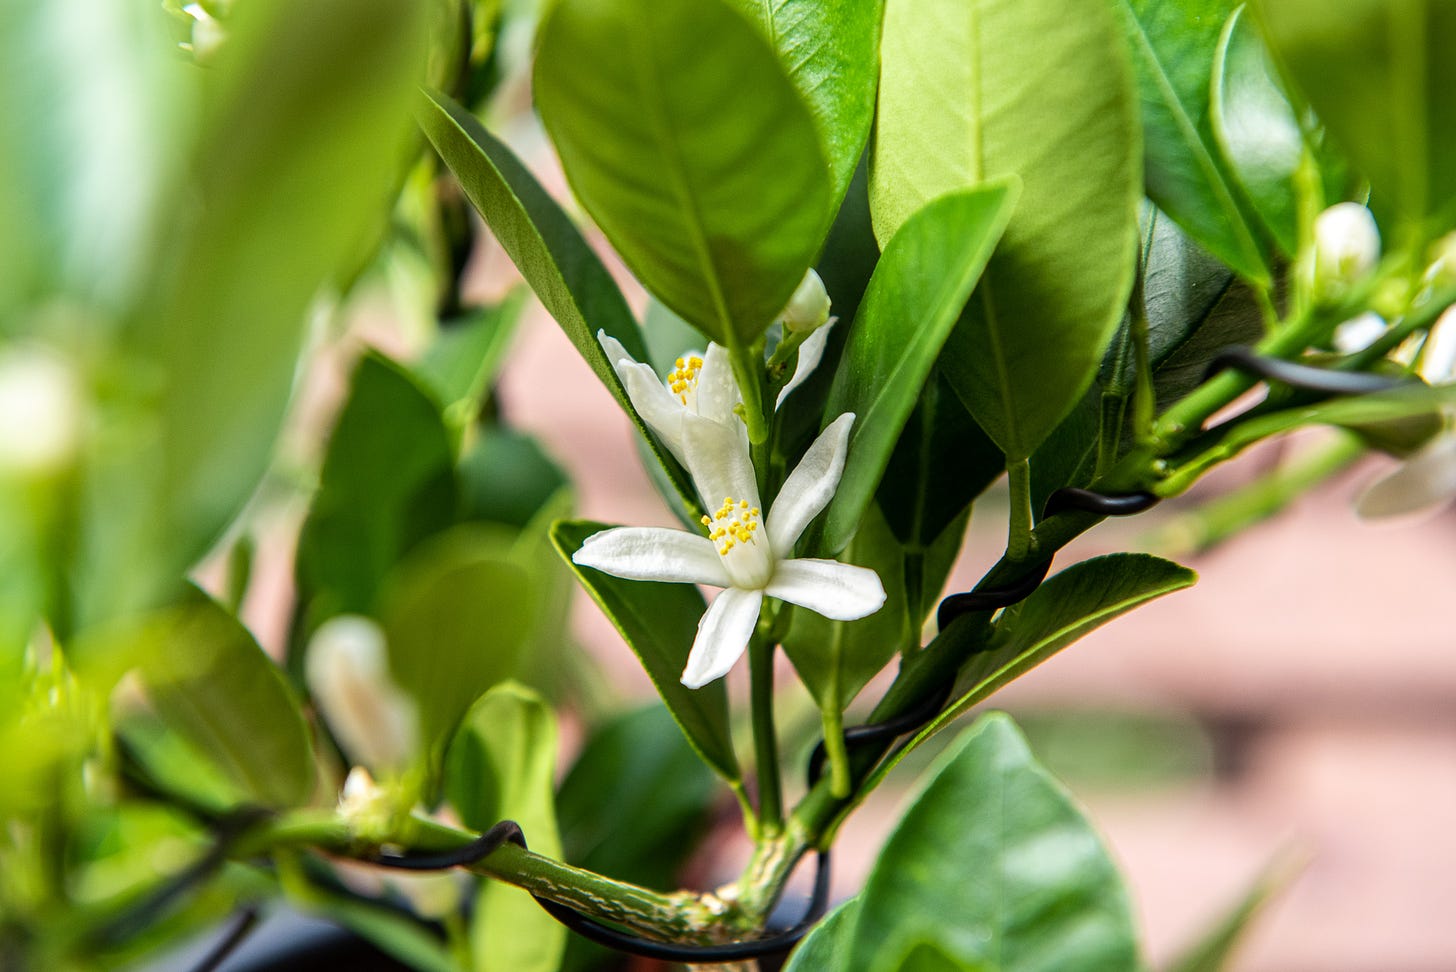 ID: Another angle of calamansi flowers on wired branches